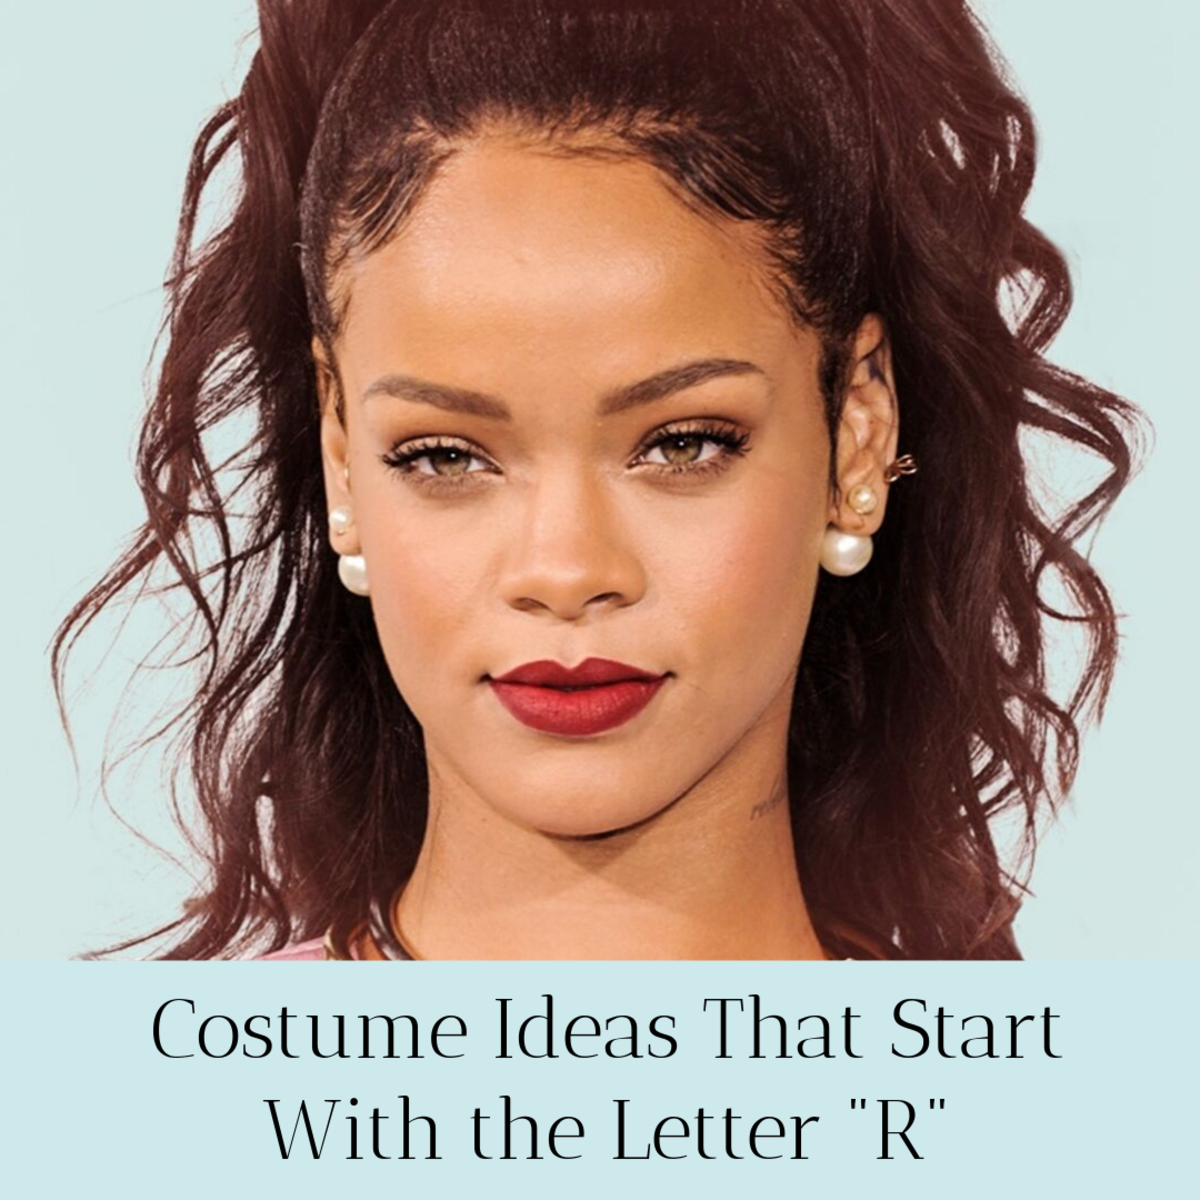 Check out this guide to ideas for costumes that begin with the letter "R." Luckily, there's no shortage of Rihanna looks to emulate!